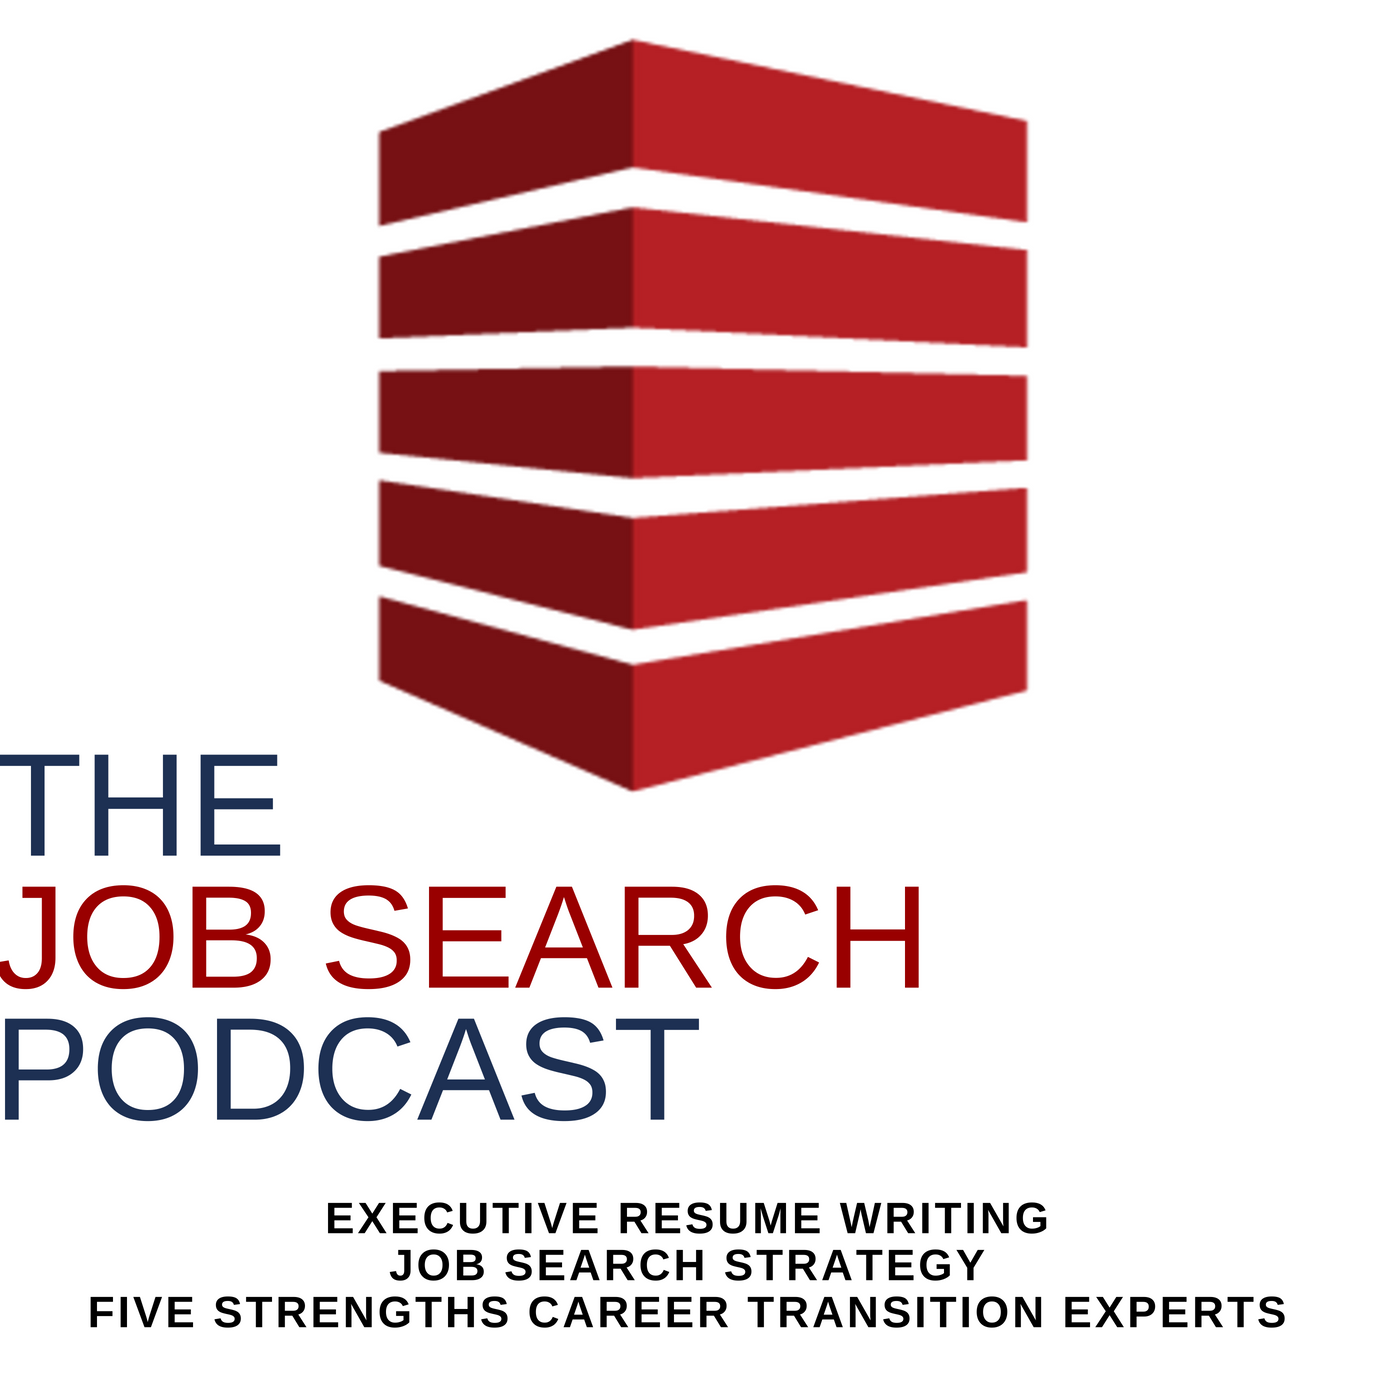 The Job Search Podcast, with Amy L. Adler